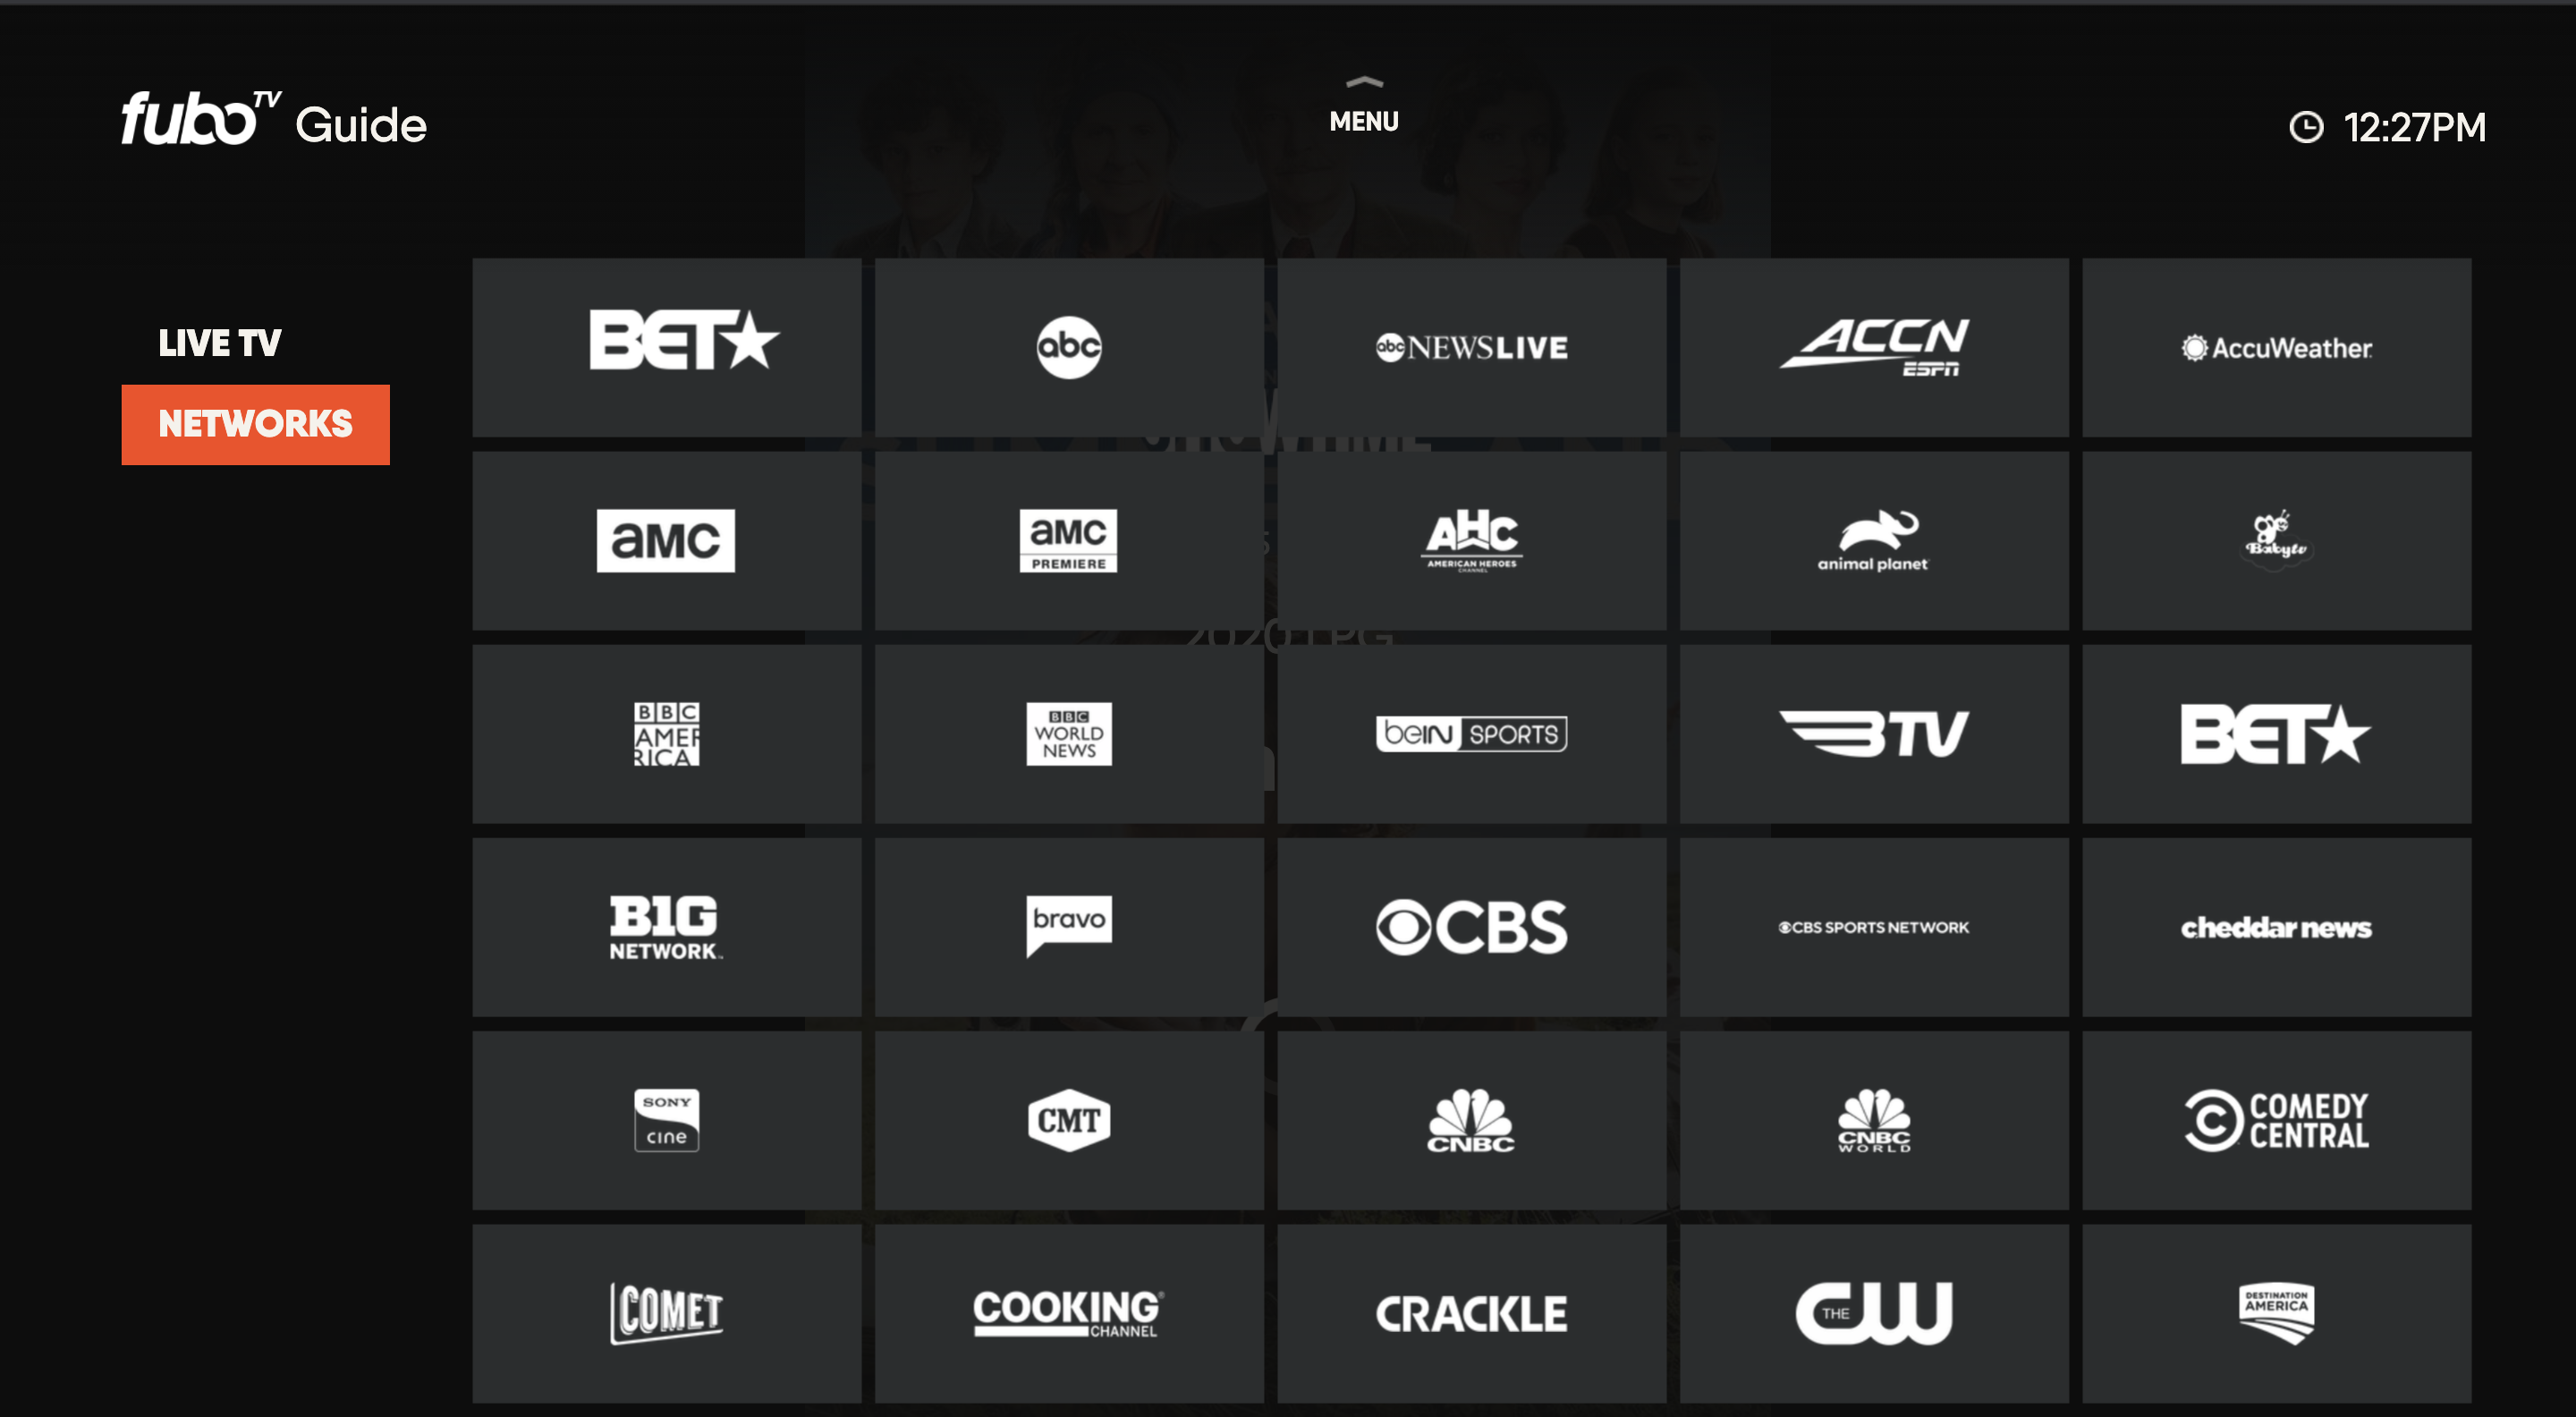 The NETWORKS screen of the FuboTV app on Hisense TV; accessible from the GUIDE screen, it shows available channels